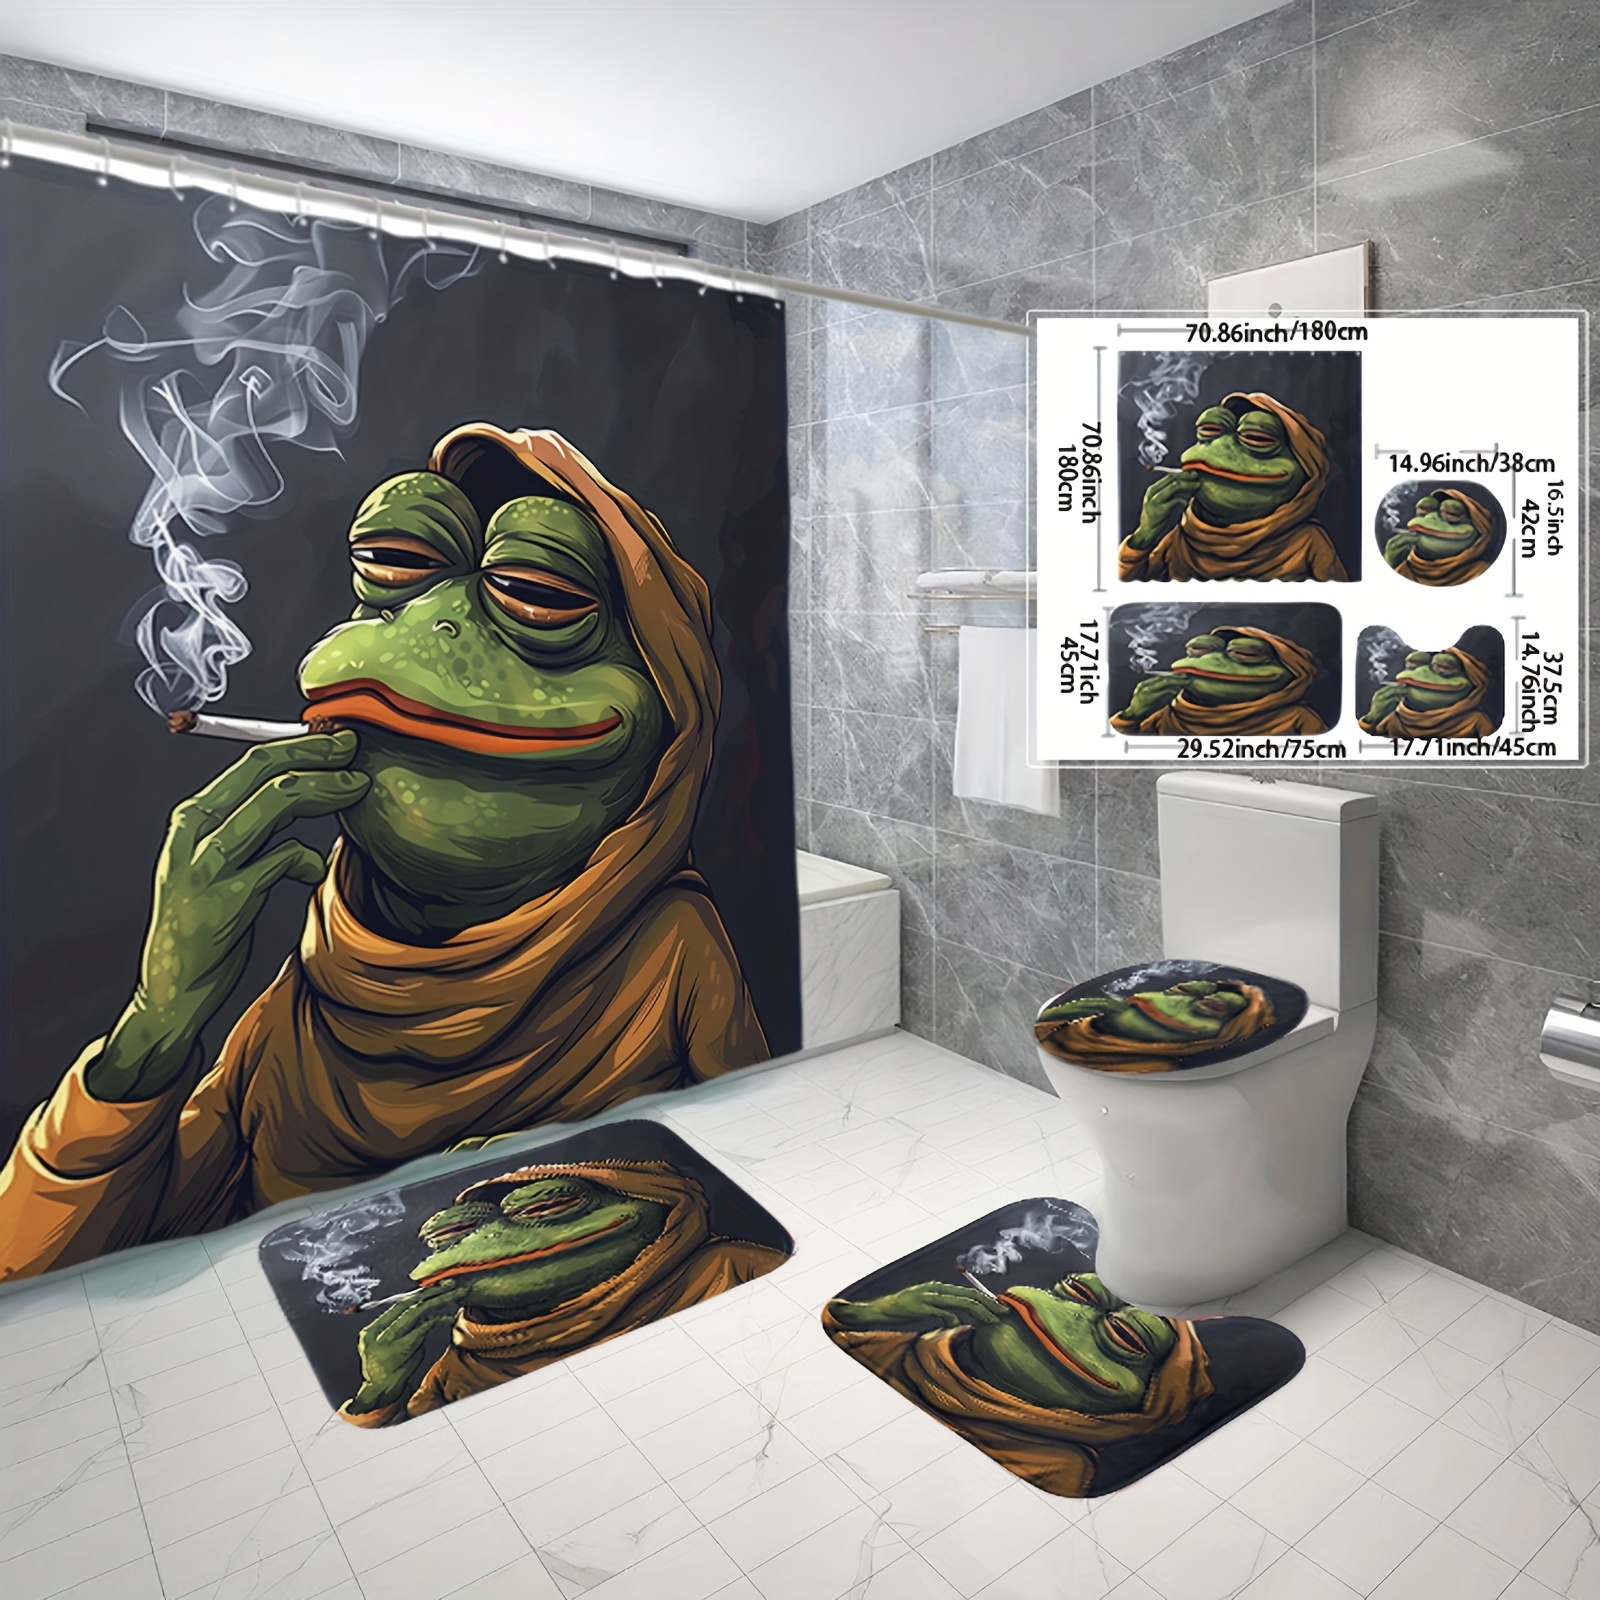 Frog-themed Shower Curtain Set (1/3/4pcs), Waterproof Polyester Fabric ...